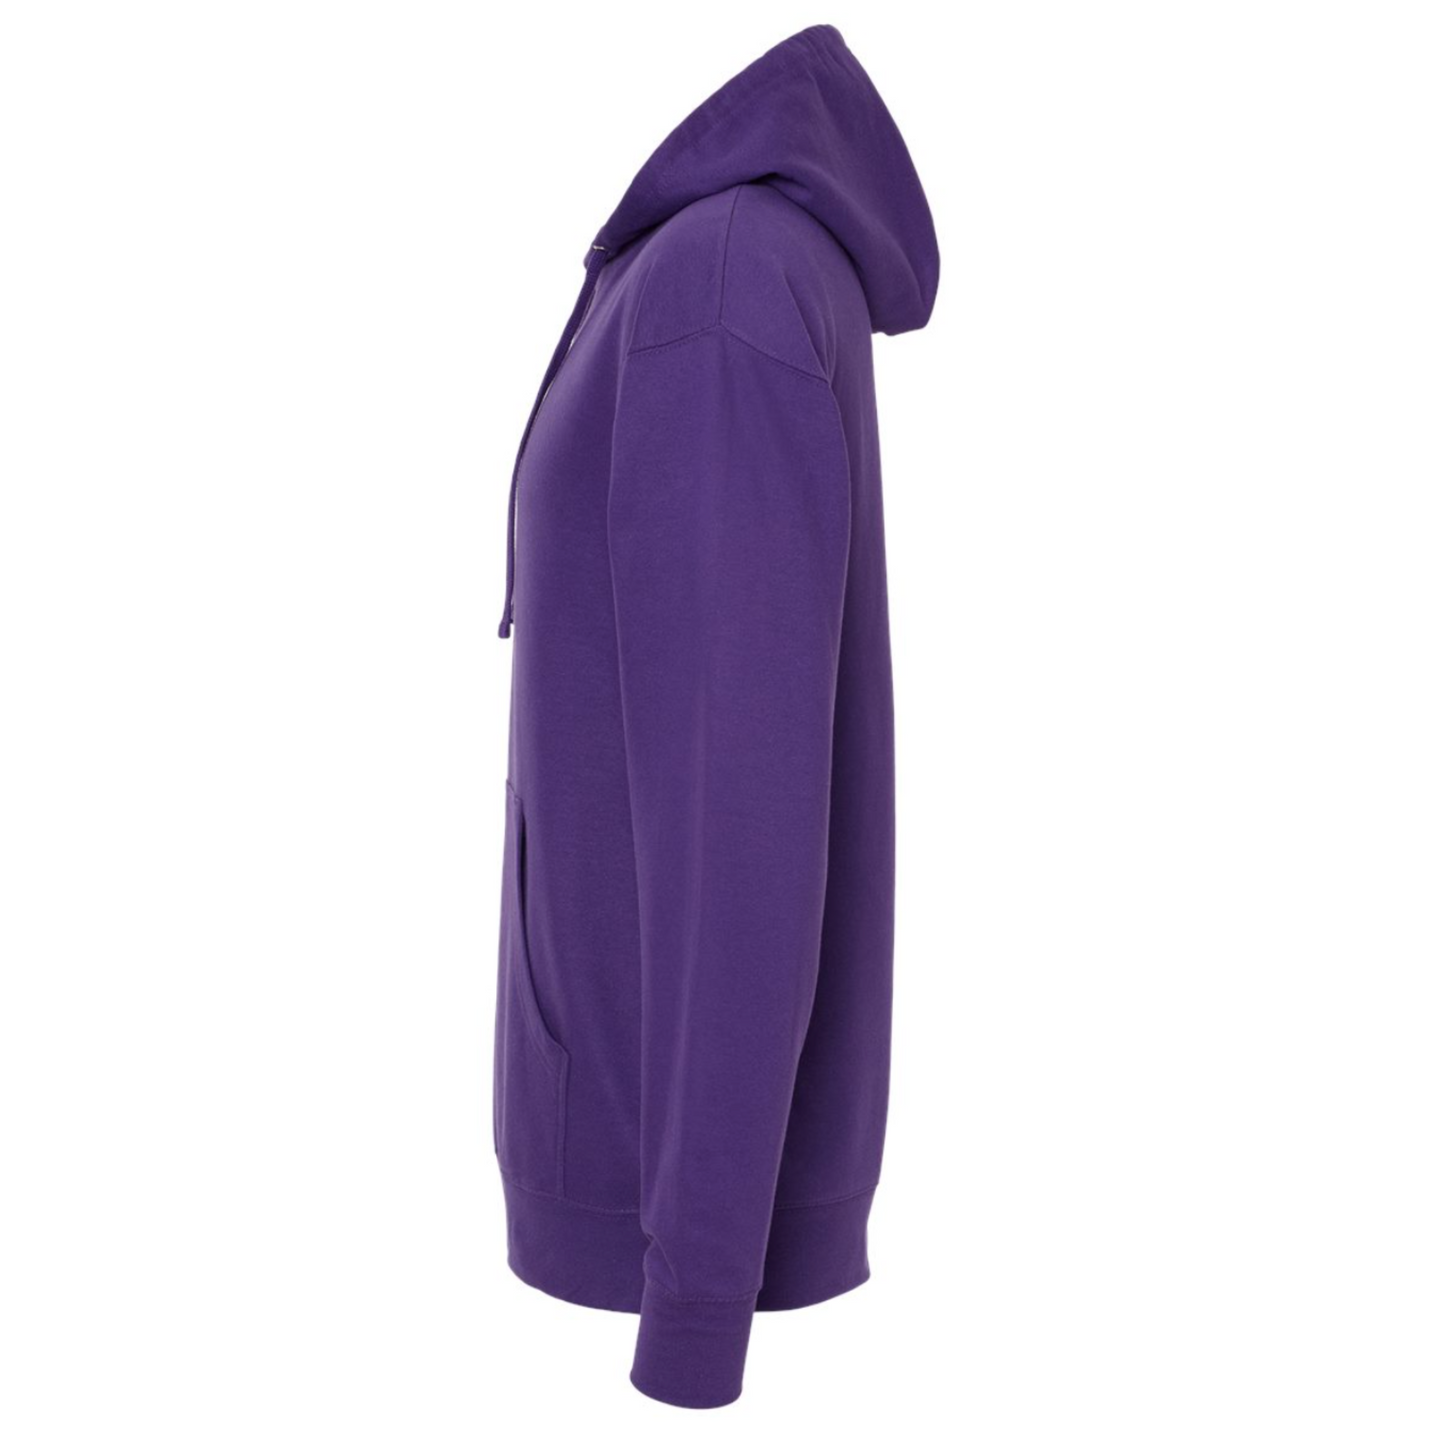 We Almost Always Almost Win Vikings Football Hooded Sweatshirt in purple with white writing. This is the side view of the sweatshirt.